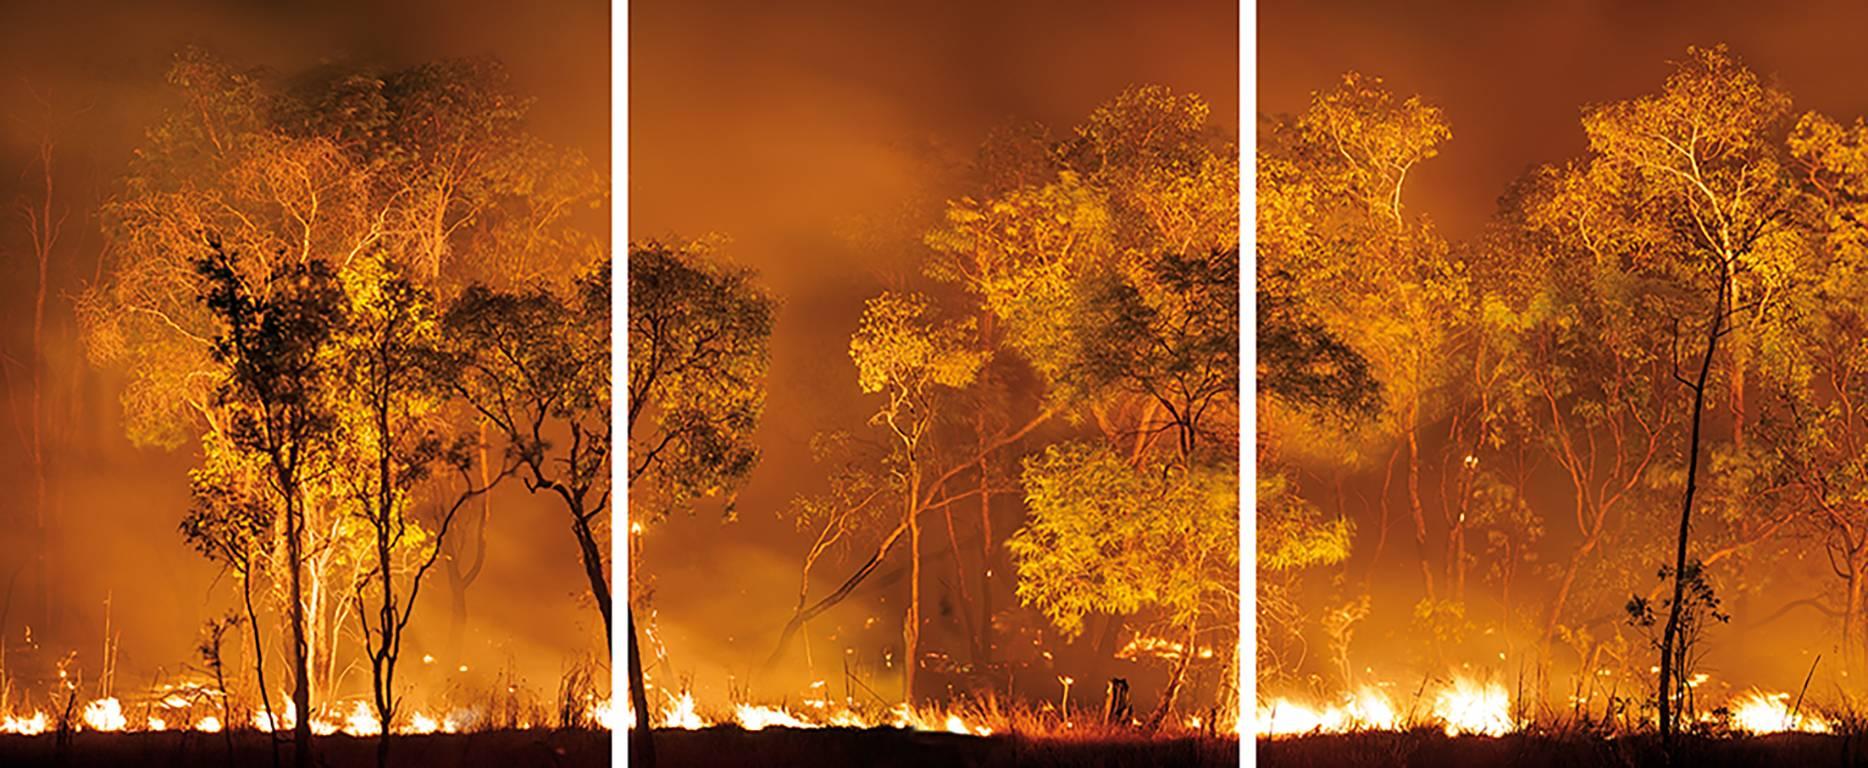 Olaf Otto Becker - Bushfire Lit to Clear Land, Australia, 2008 For Sale at  1stDibs